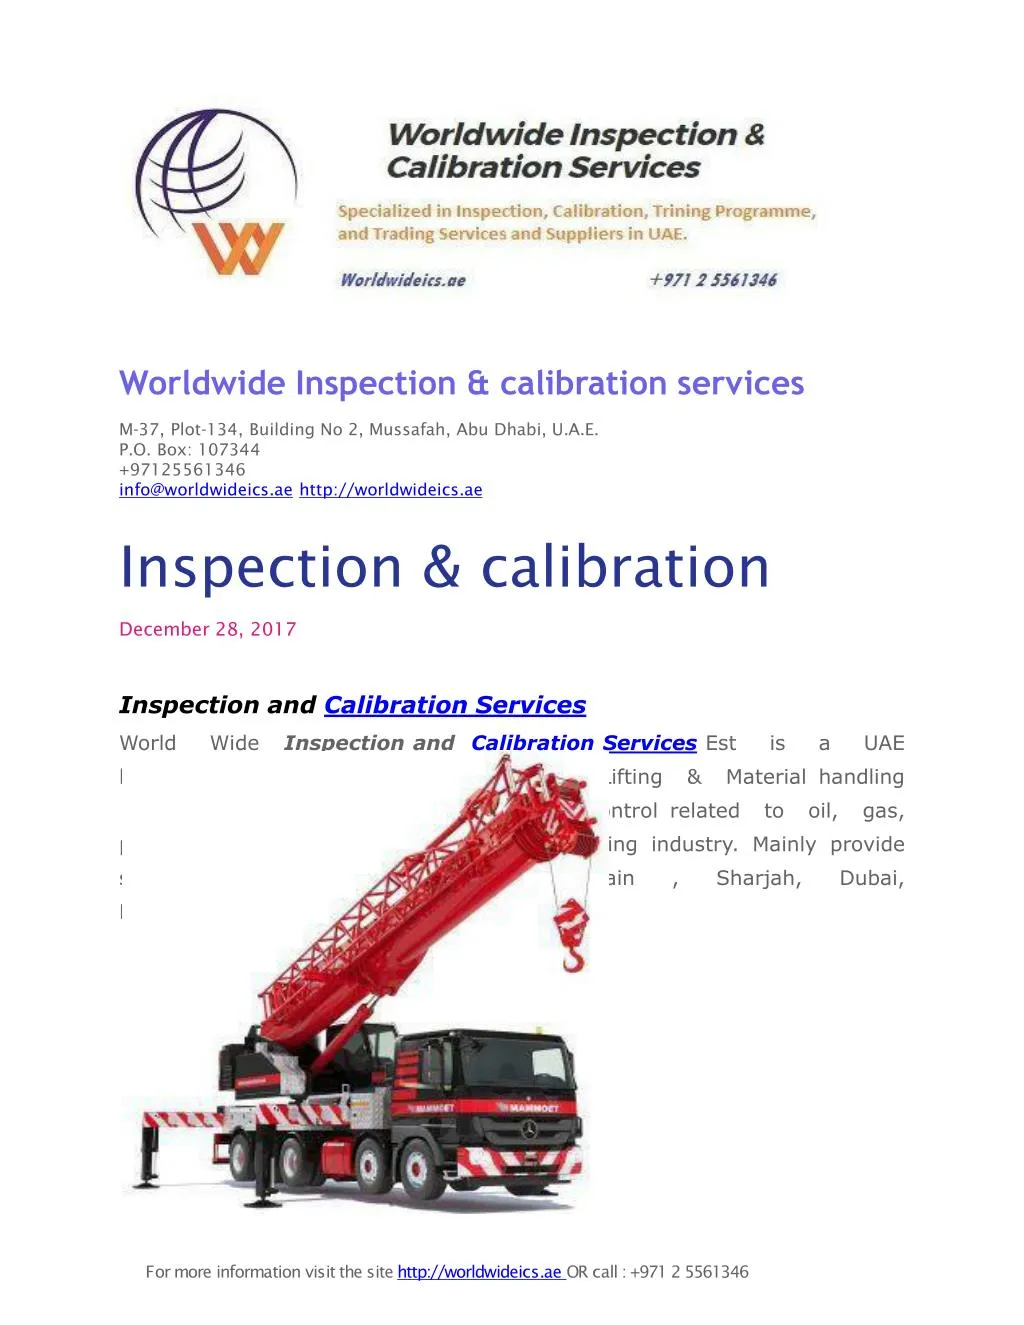 worldwide inspection calibration services